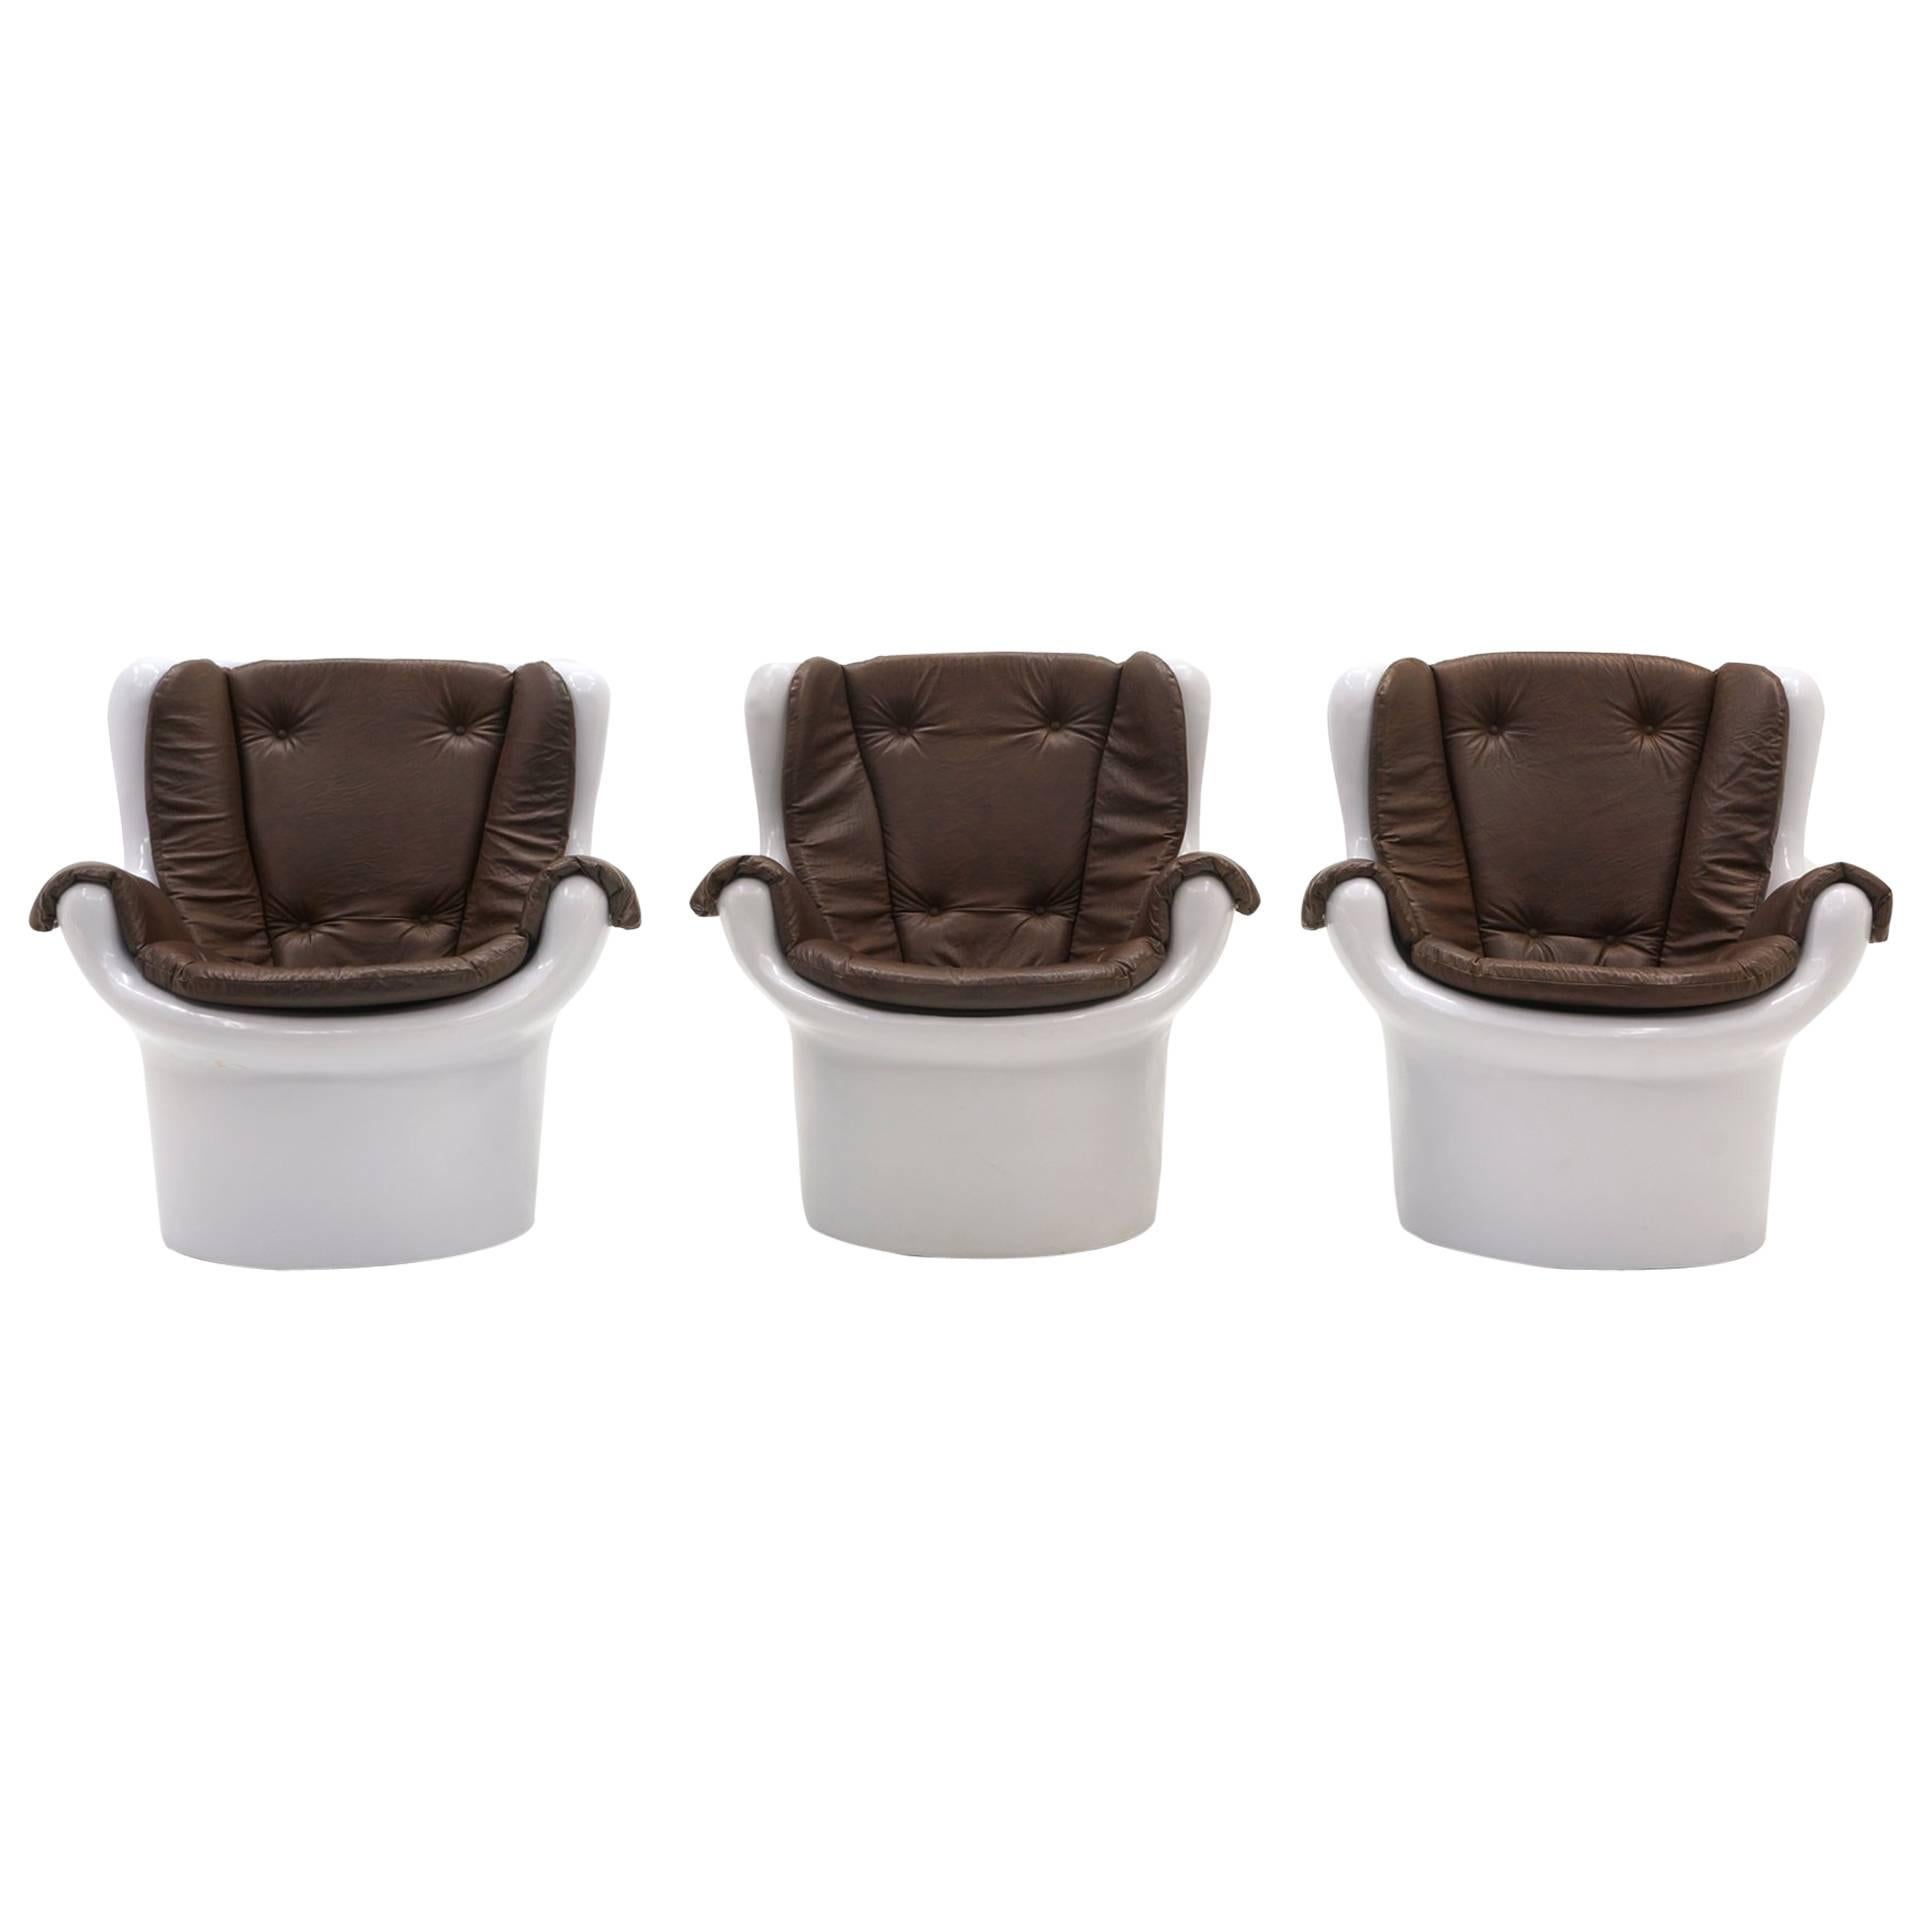 Mod Molded White Plastic, Chocolate Vinyl Lounge Chairs, 1970s. ONE AVAILABLE!